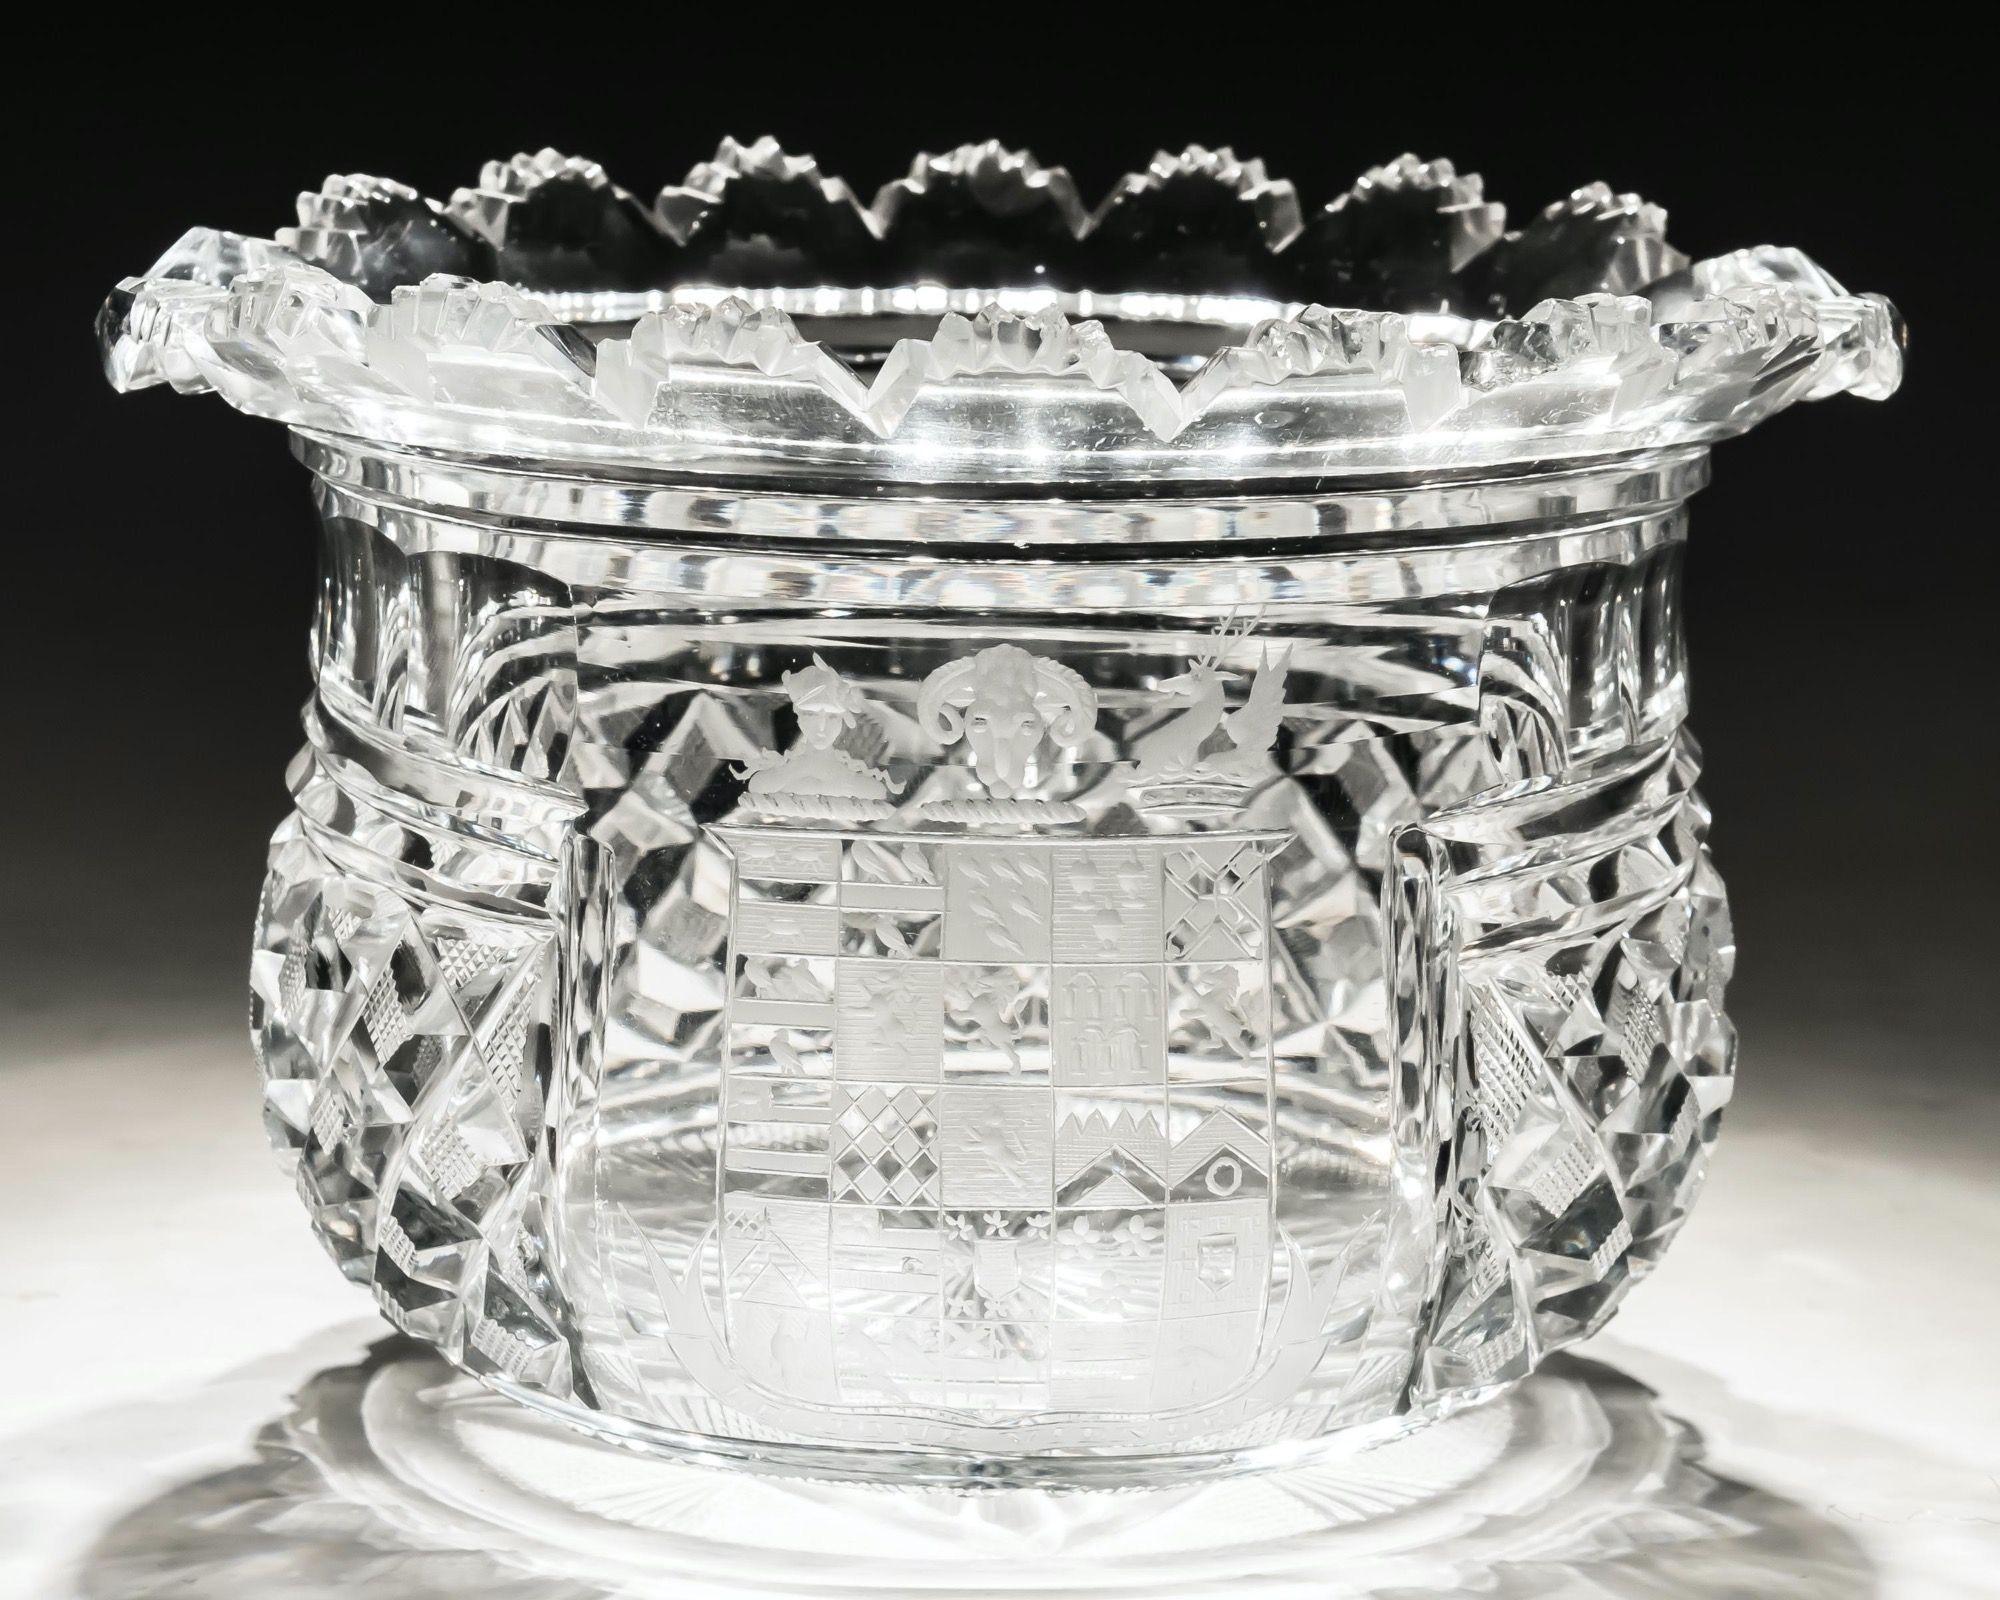 European A Elaborate Suite Of Regency Period Cut Glass From The Lambton Service